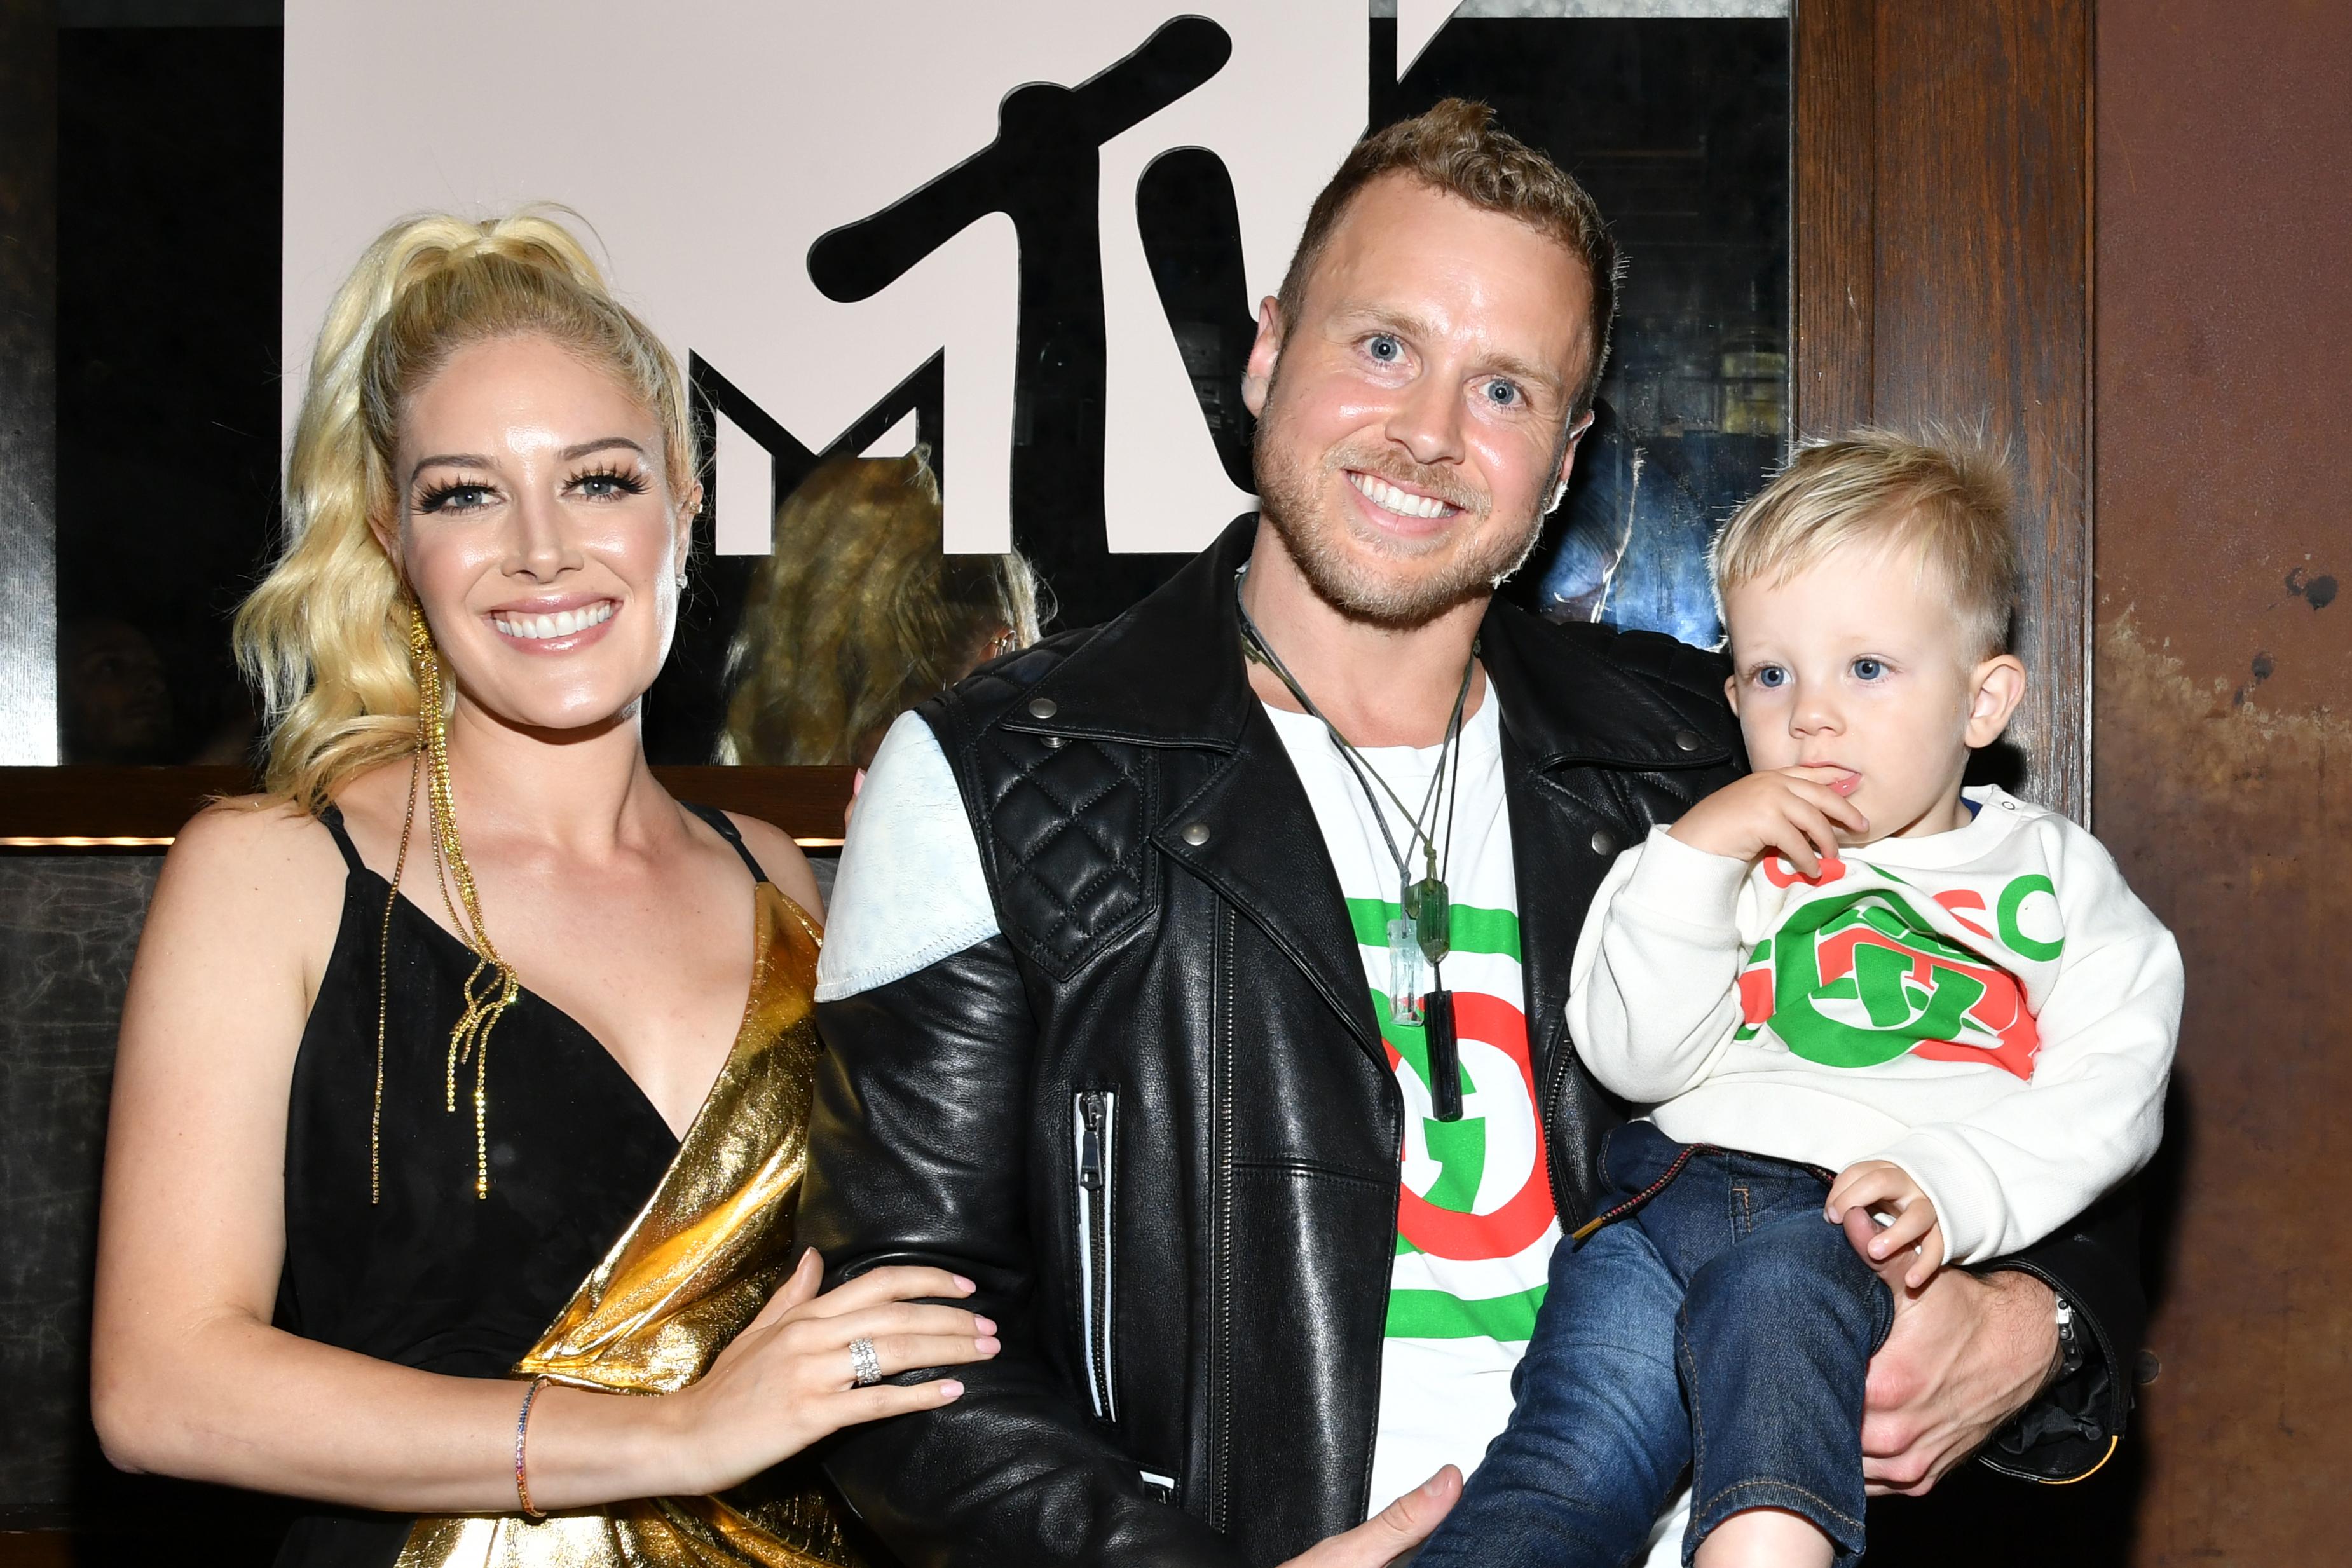 Heidi Pratt, Spencer Pratt and their son Connor attend the party for the premiere of MTV's 'The Hills: New Beginnings' in Los Angeles.